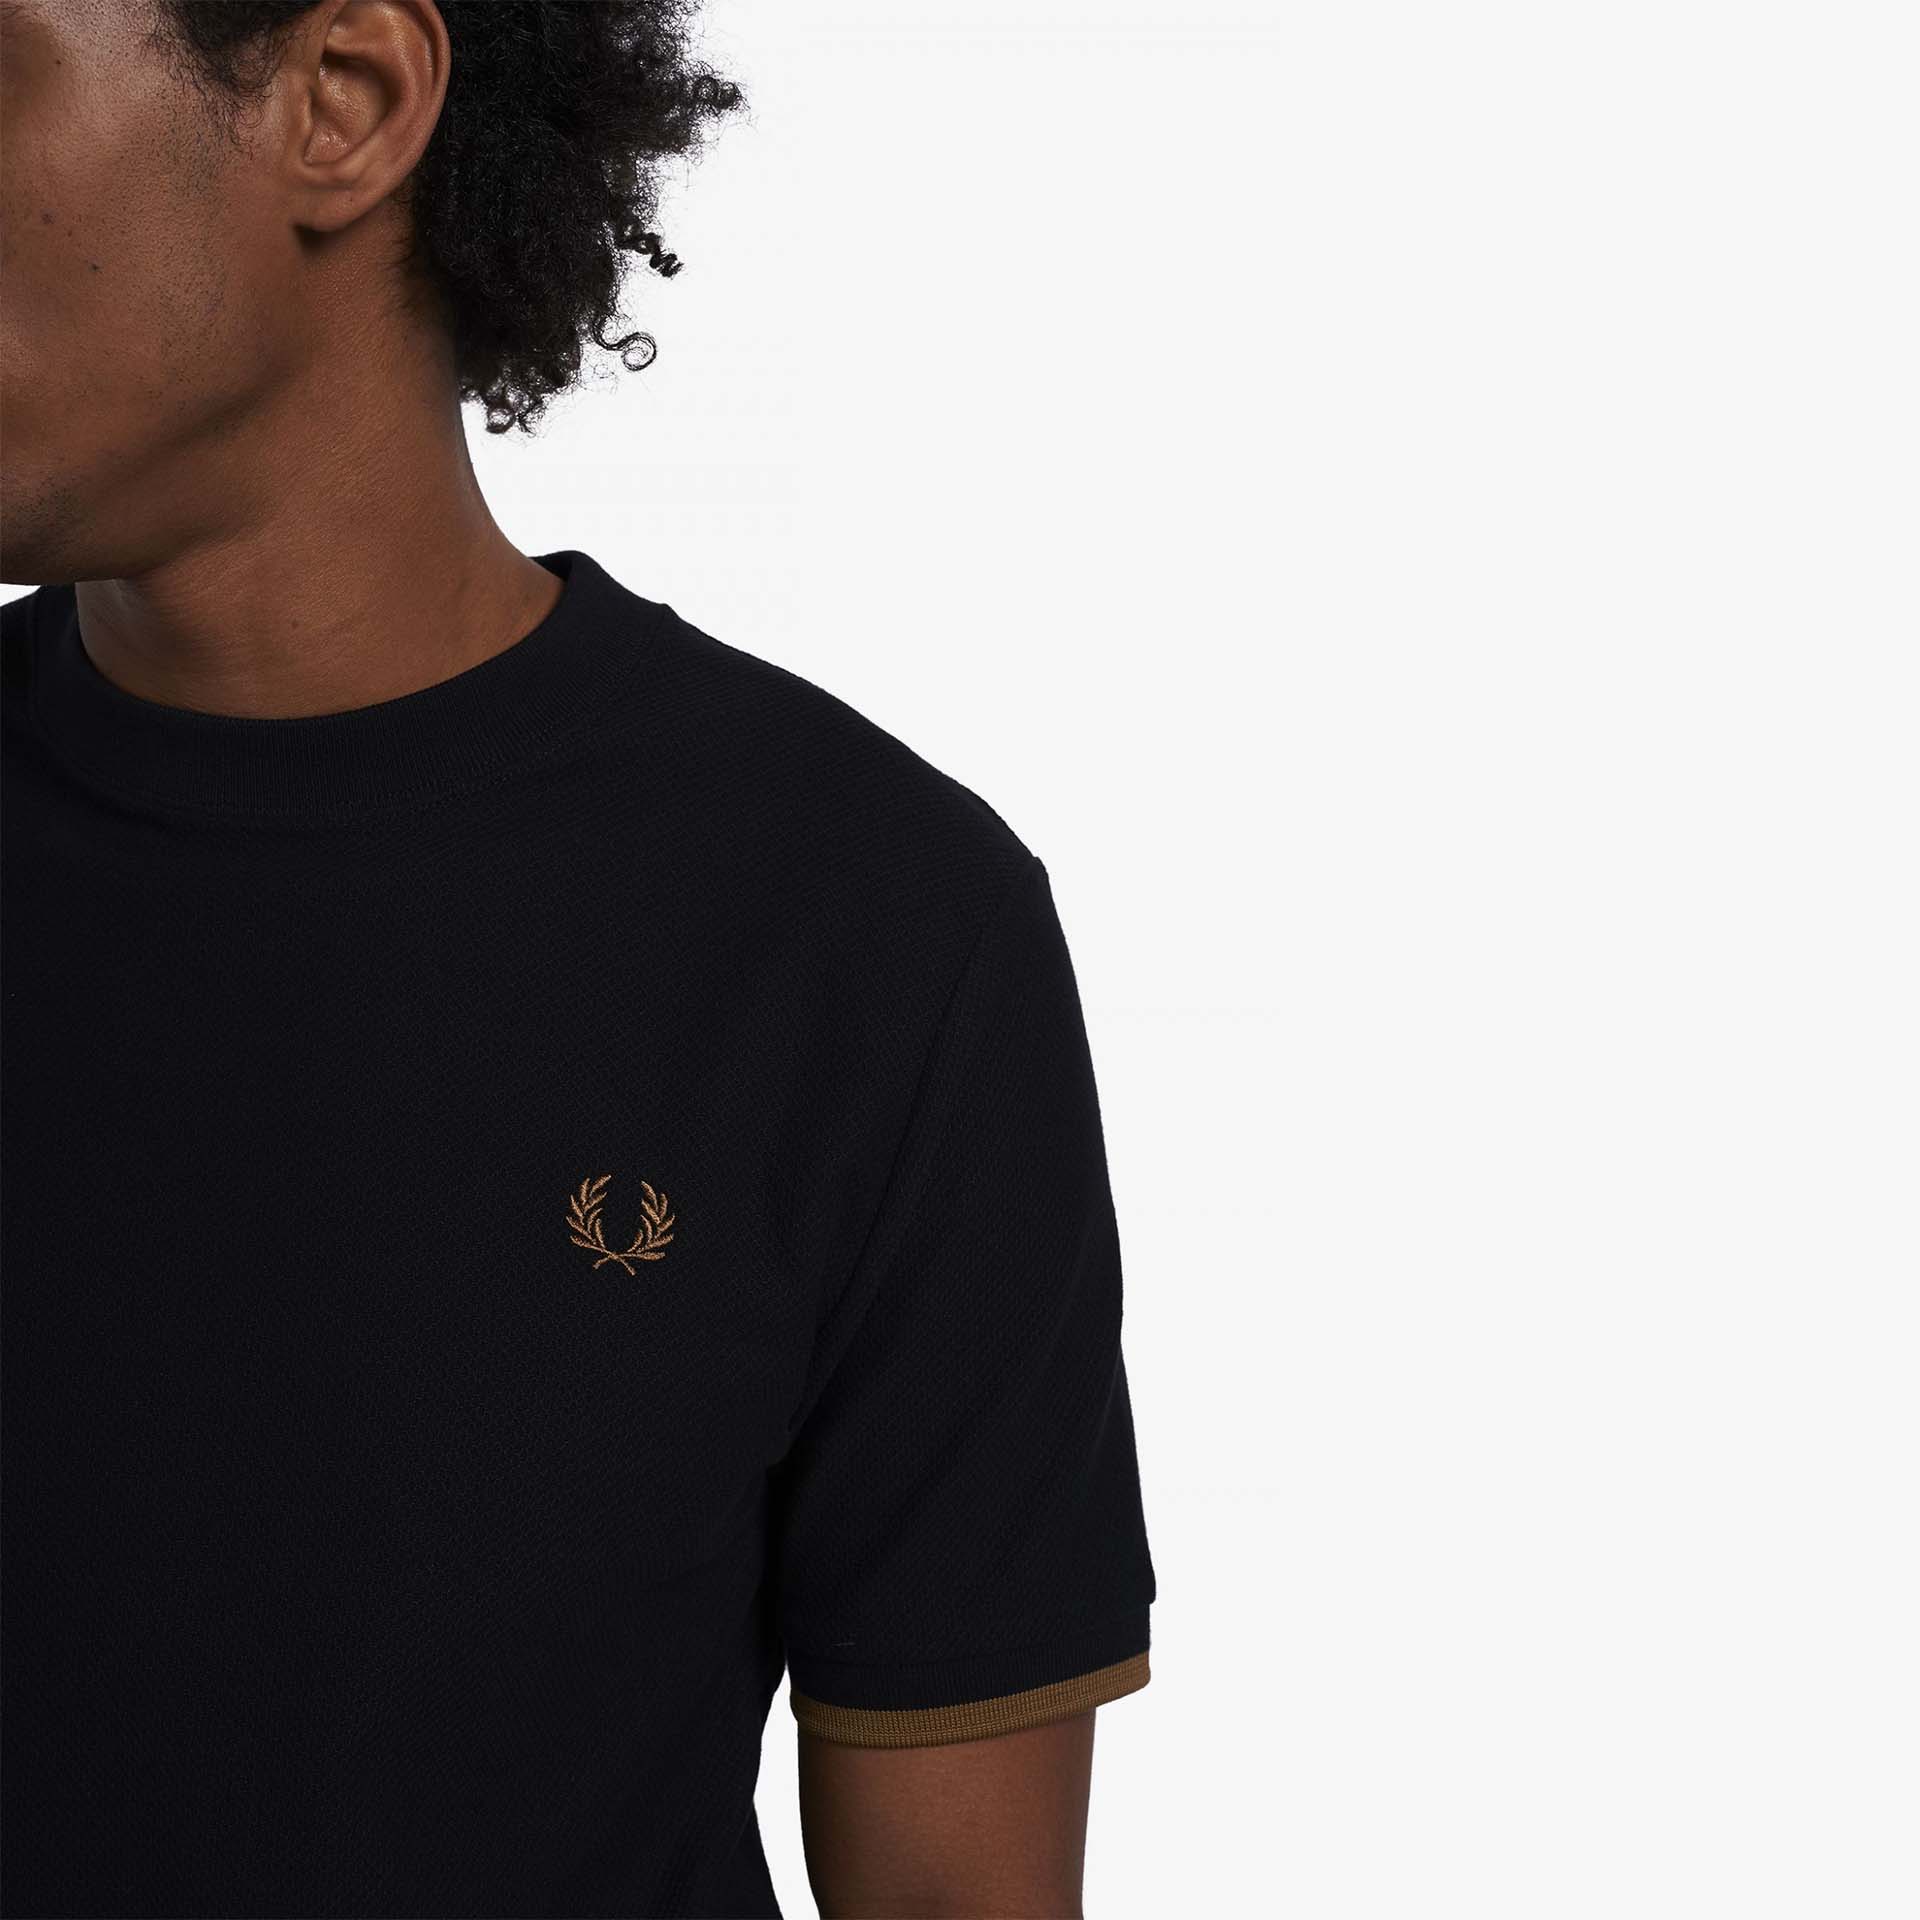 Fred Perry Tipped Cuff Pique Shirt Black